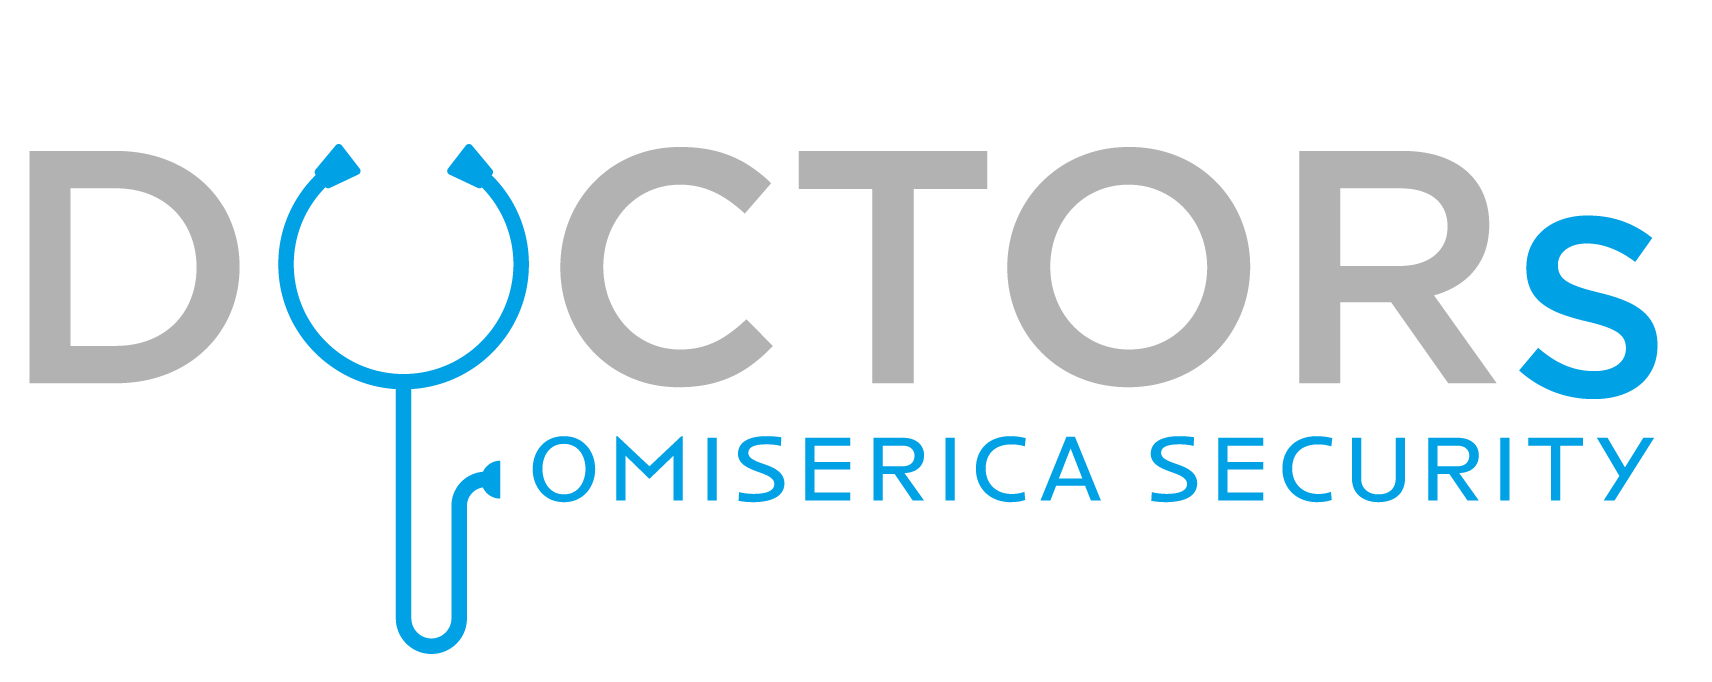 Omiserica-Technology-Security